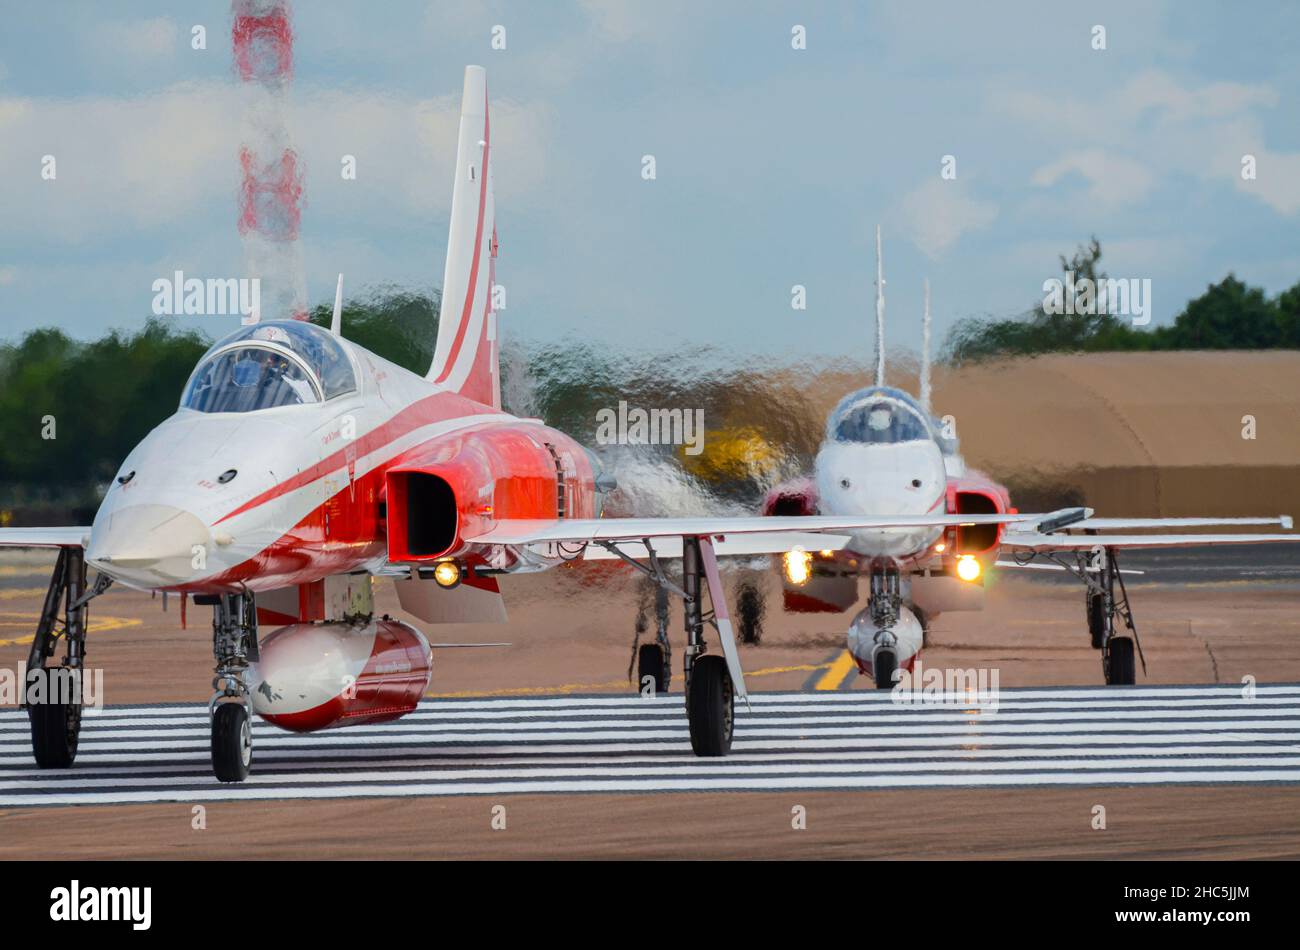 Patrouille Suisse, Swiss display team fighter jet planes arriving at Royal International Air Tattoo, UK, RAF Fairford. Taxiing jets creating heat haze Stock Photo